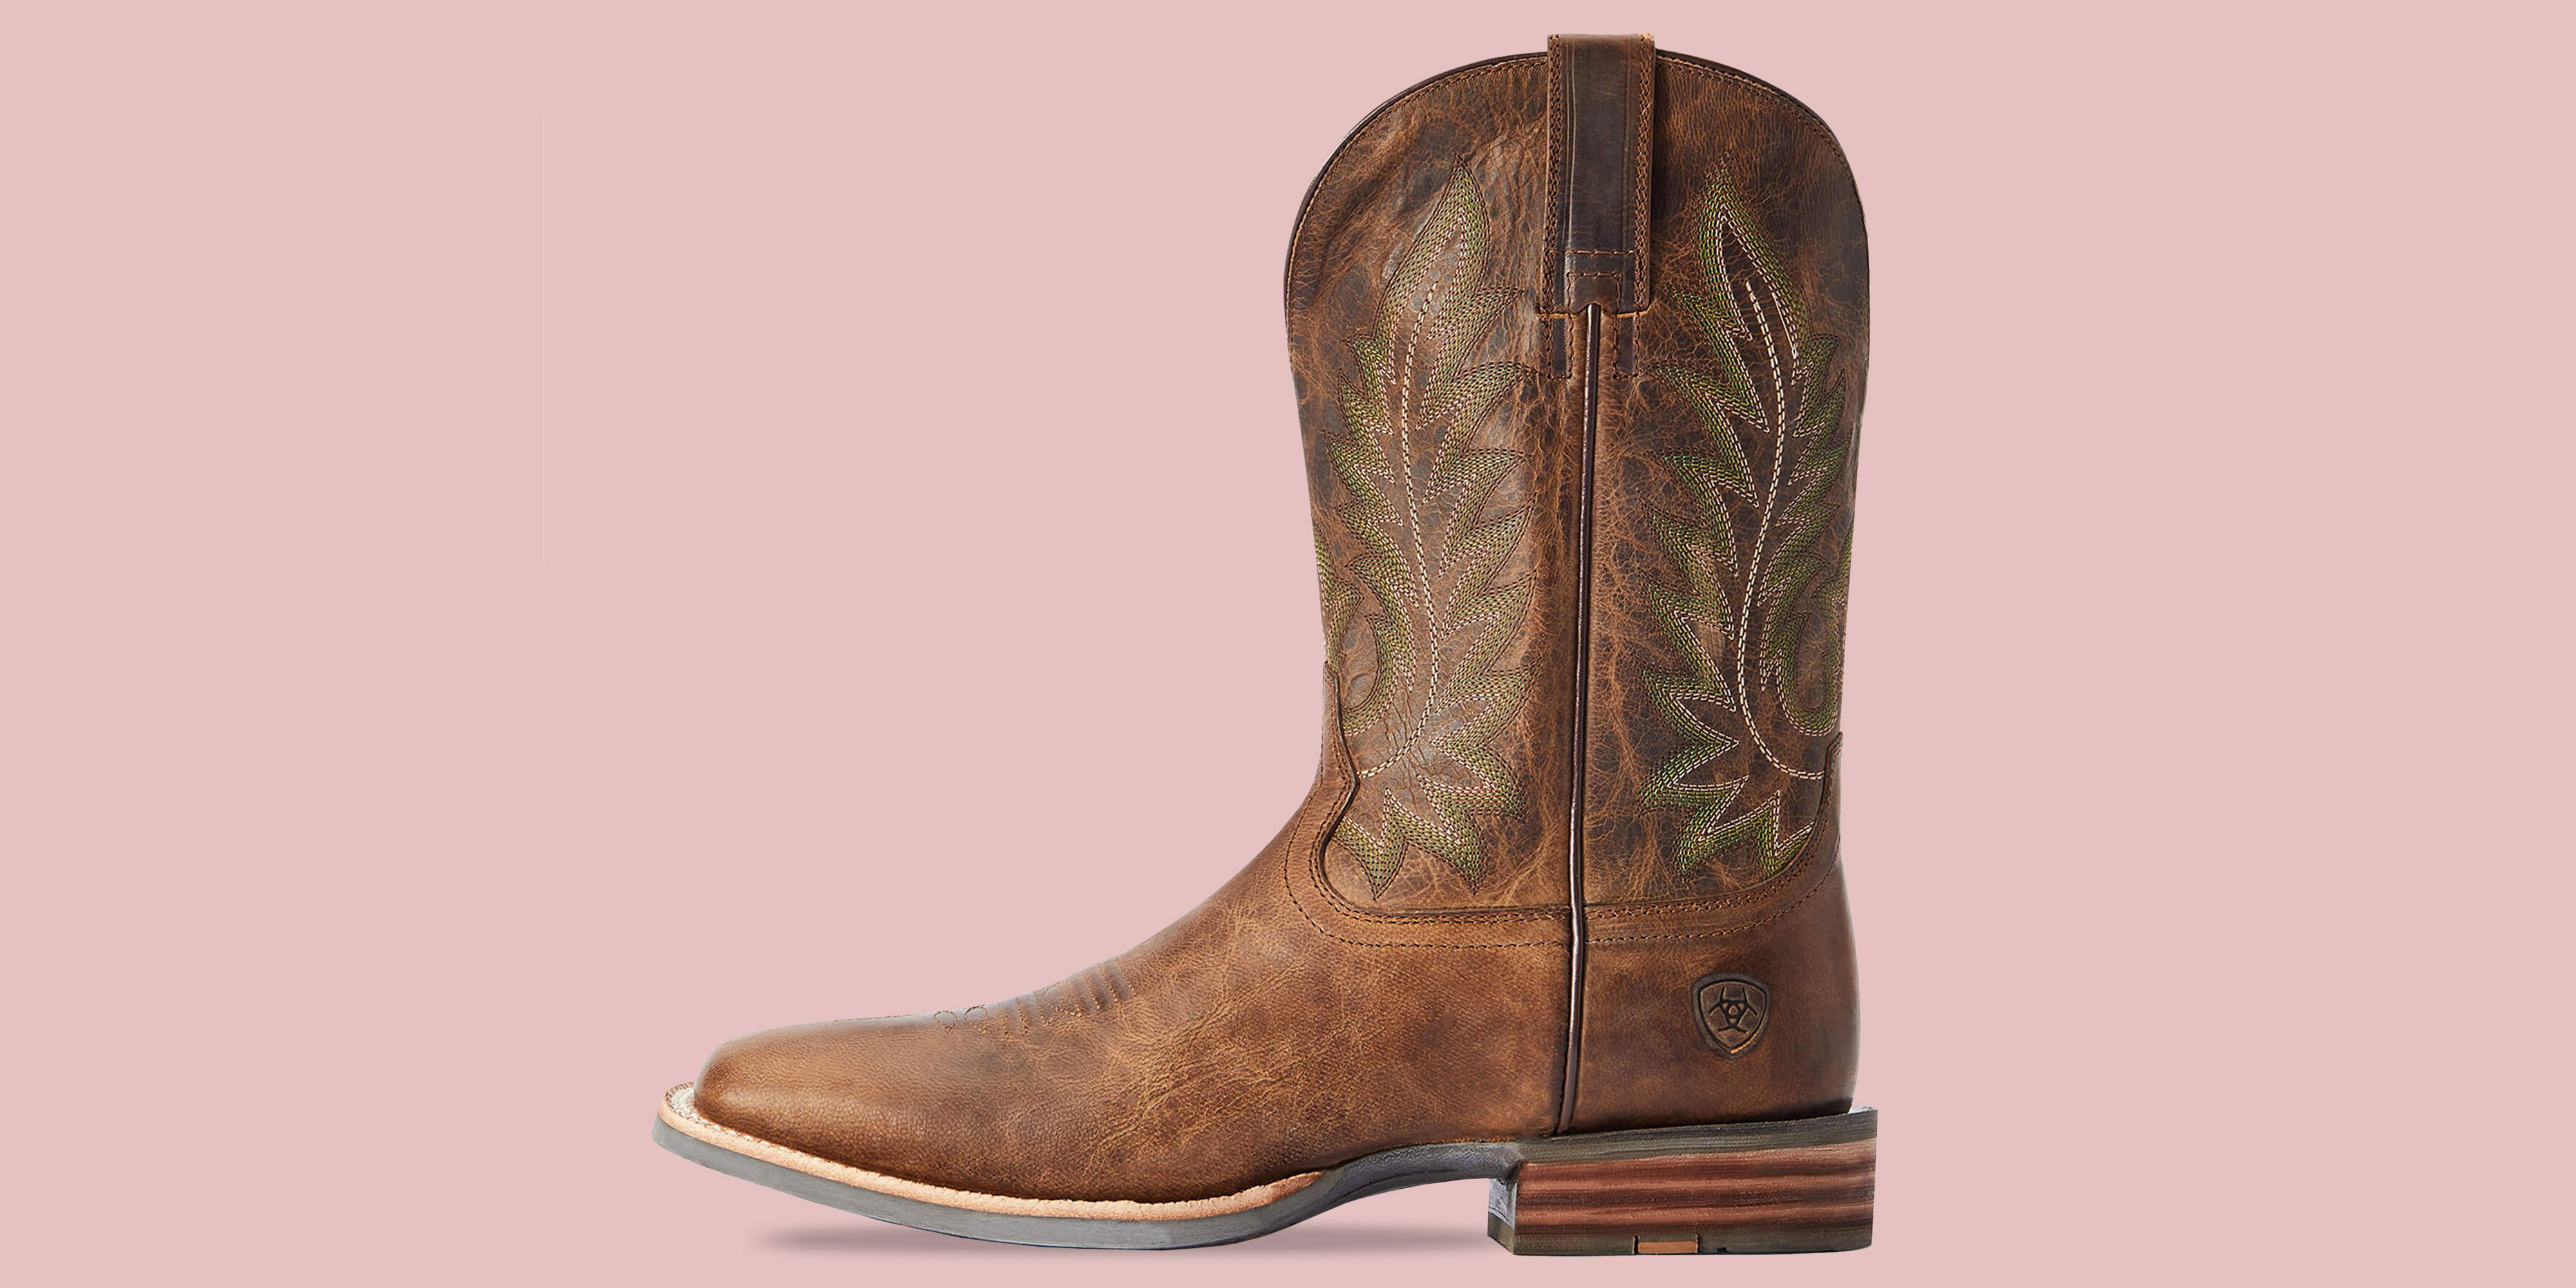 15 Cowboy Boot Brands That Prove Western Style Is Here to Stay